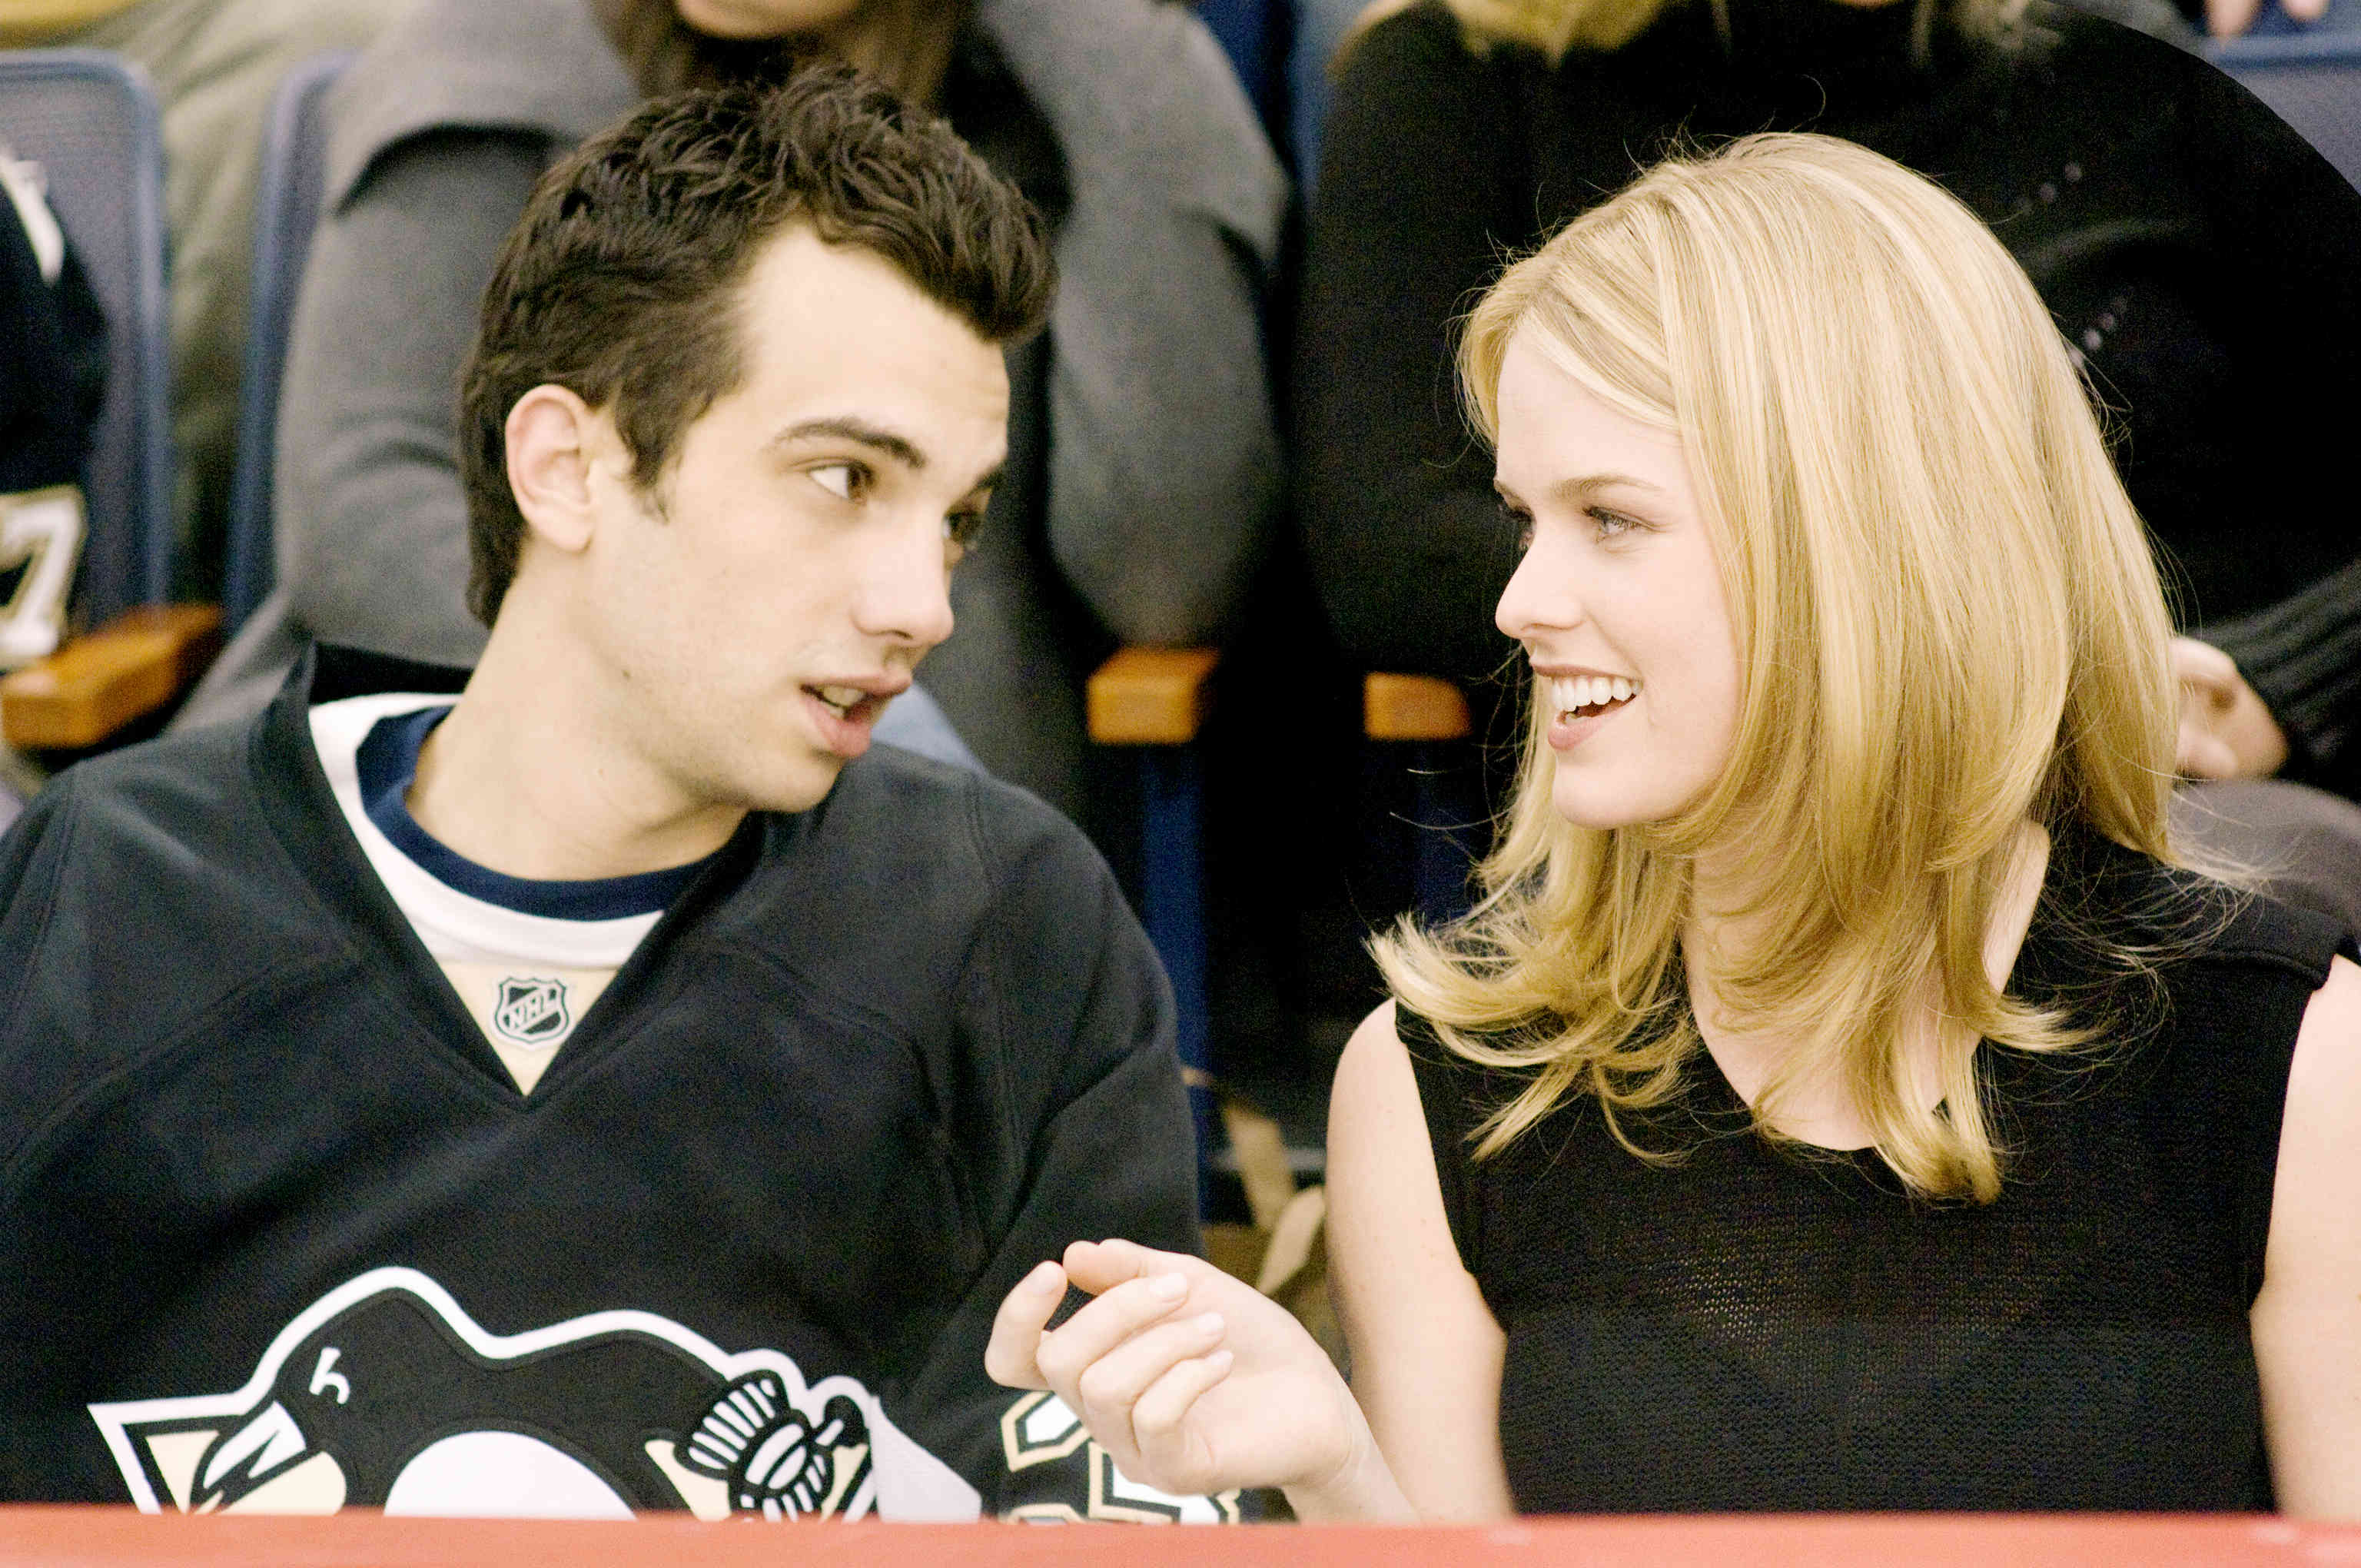 Jay Baruchel stars as Kirk Kettner and Alice Eve stars as Molly in DreamWorks SKG's She's Out of My League (2010)